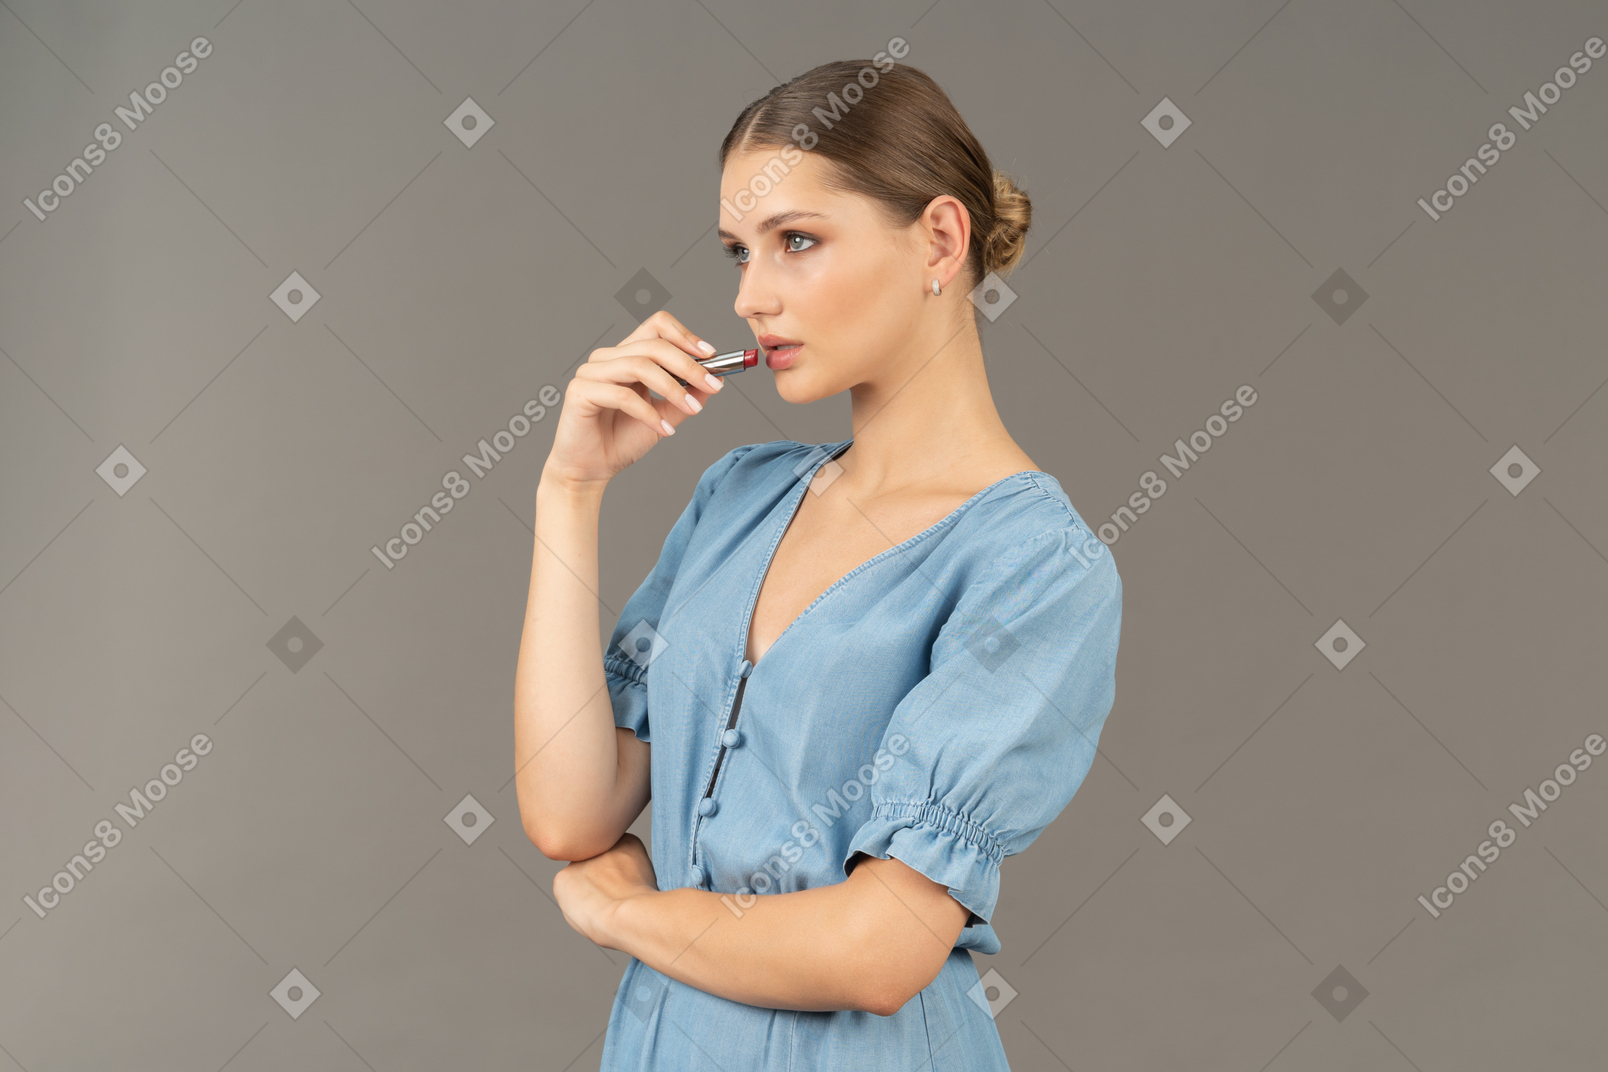 Three-quarter view of a young woman in blue dress applying a lipstick